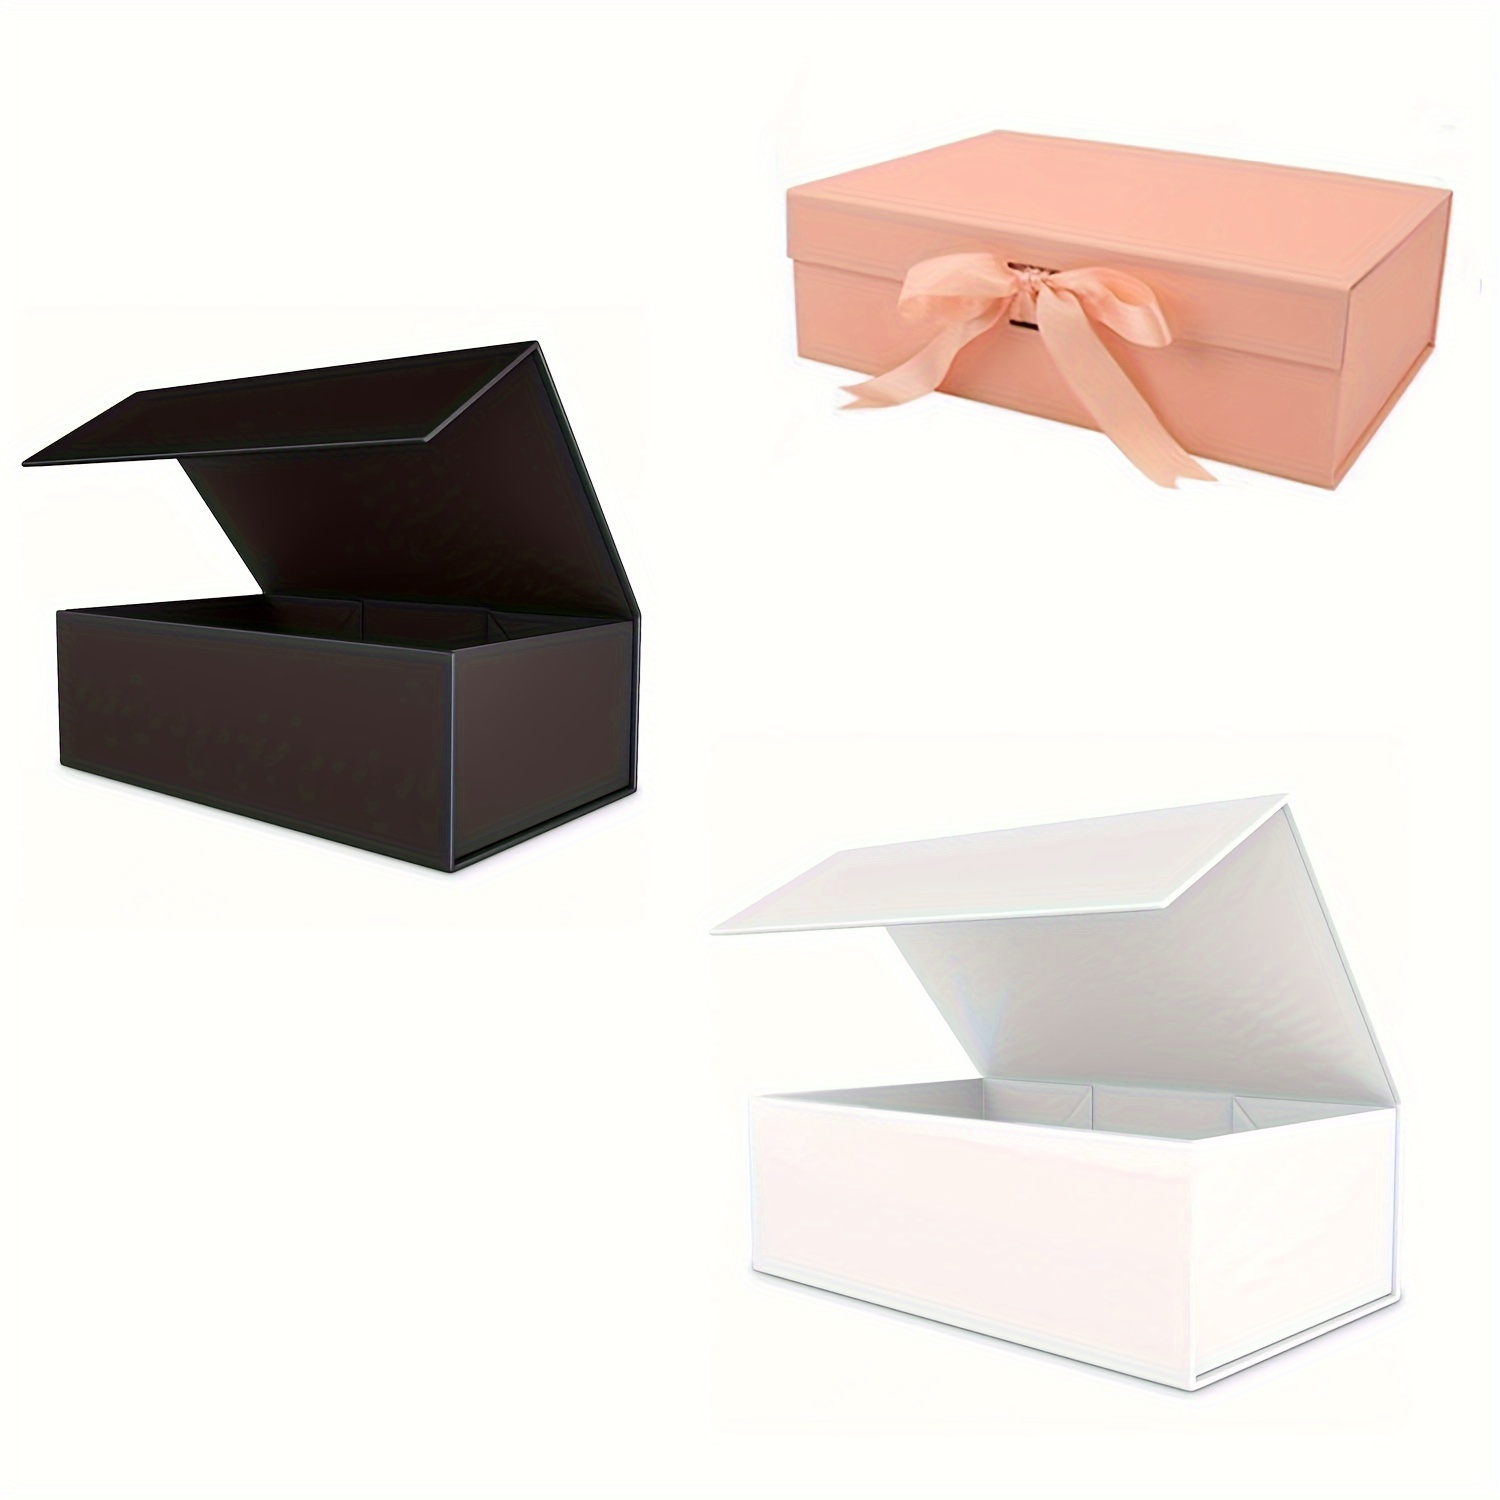 

Rose Golden Foldable Gift Box With Magnetic Closure - Black, White, And Pink Options - Perfect For Bridesmaid, Birthday, Or Any Special Occasion - Paper Material